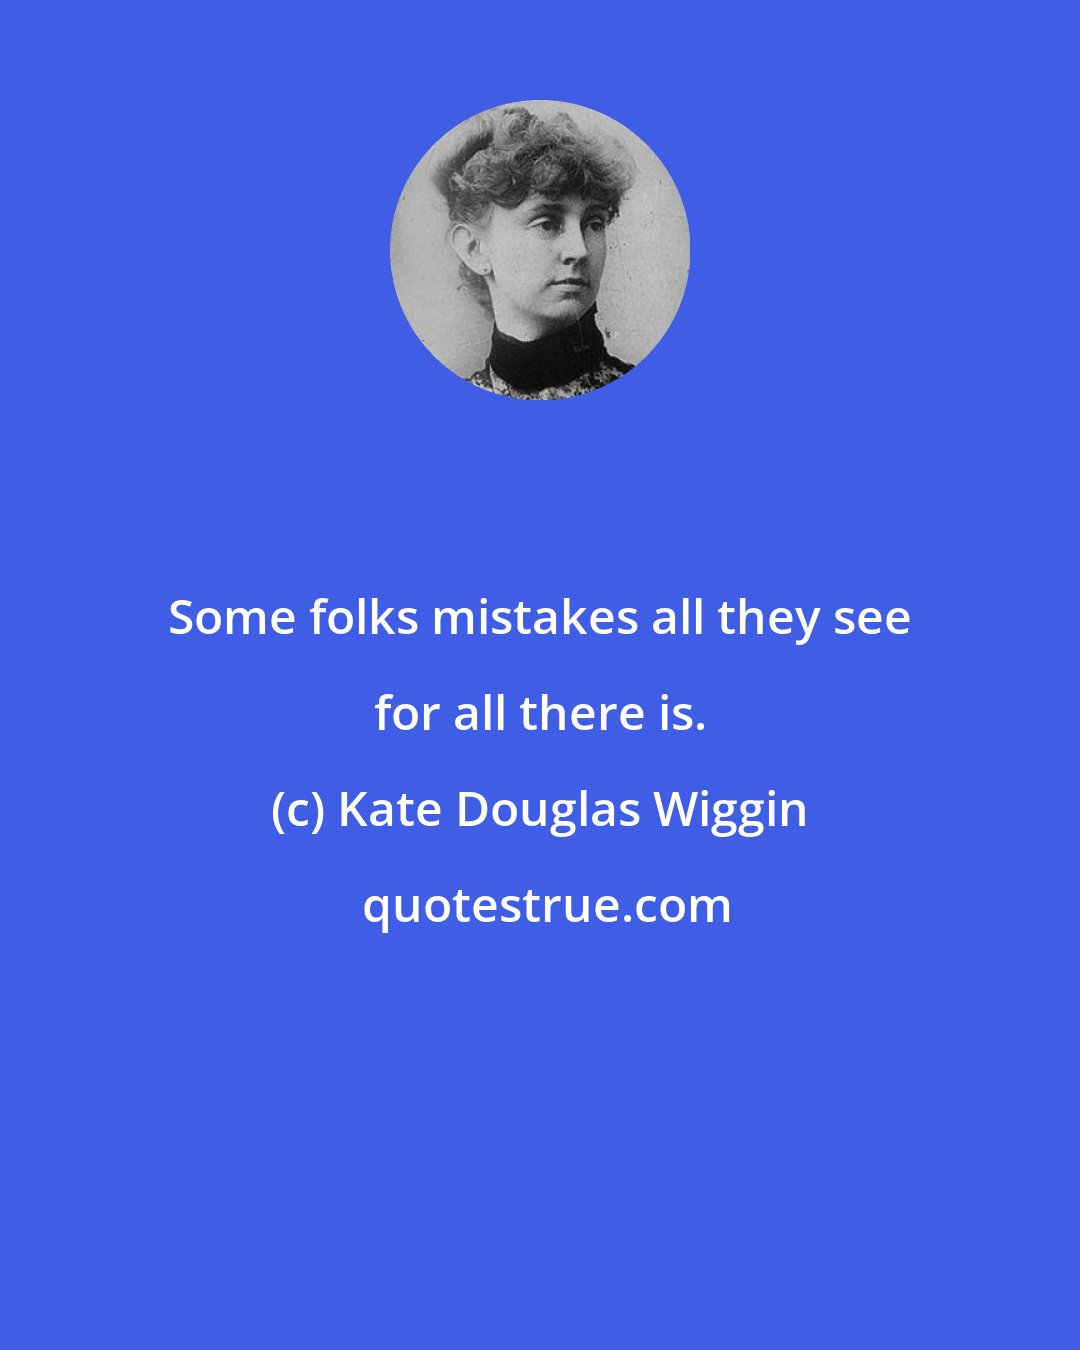 Kate Douglas Wiggin: Some folks mistakes all they see for all there is.